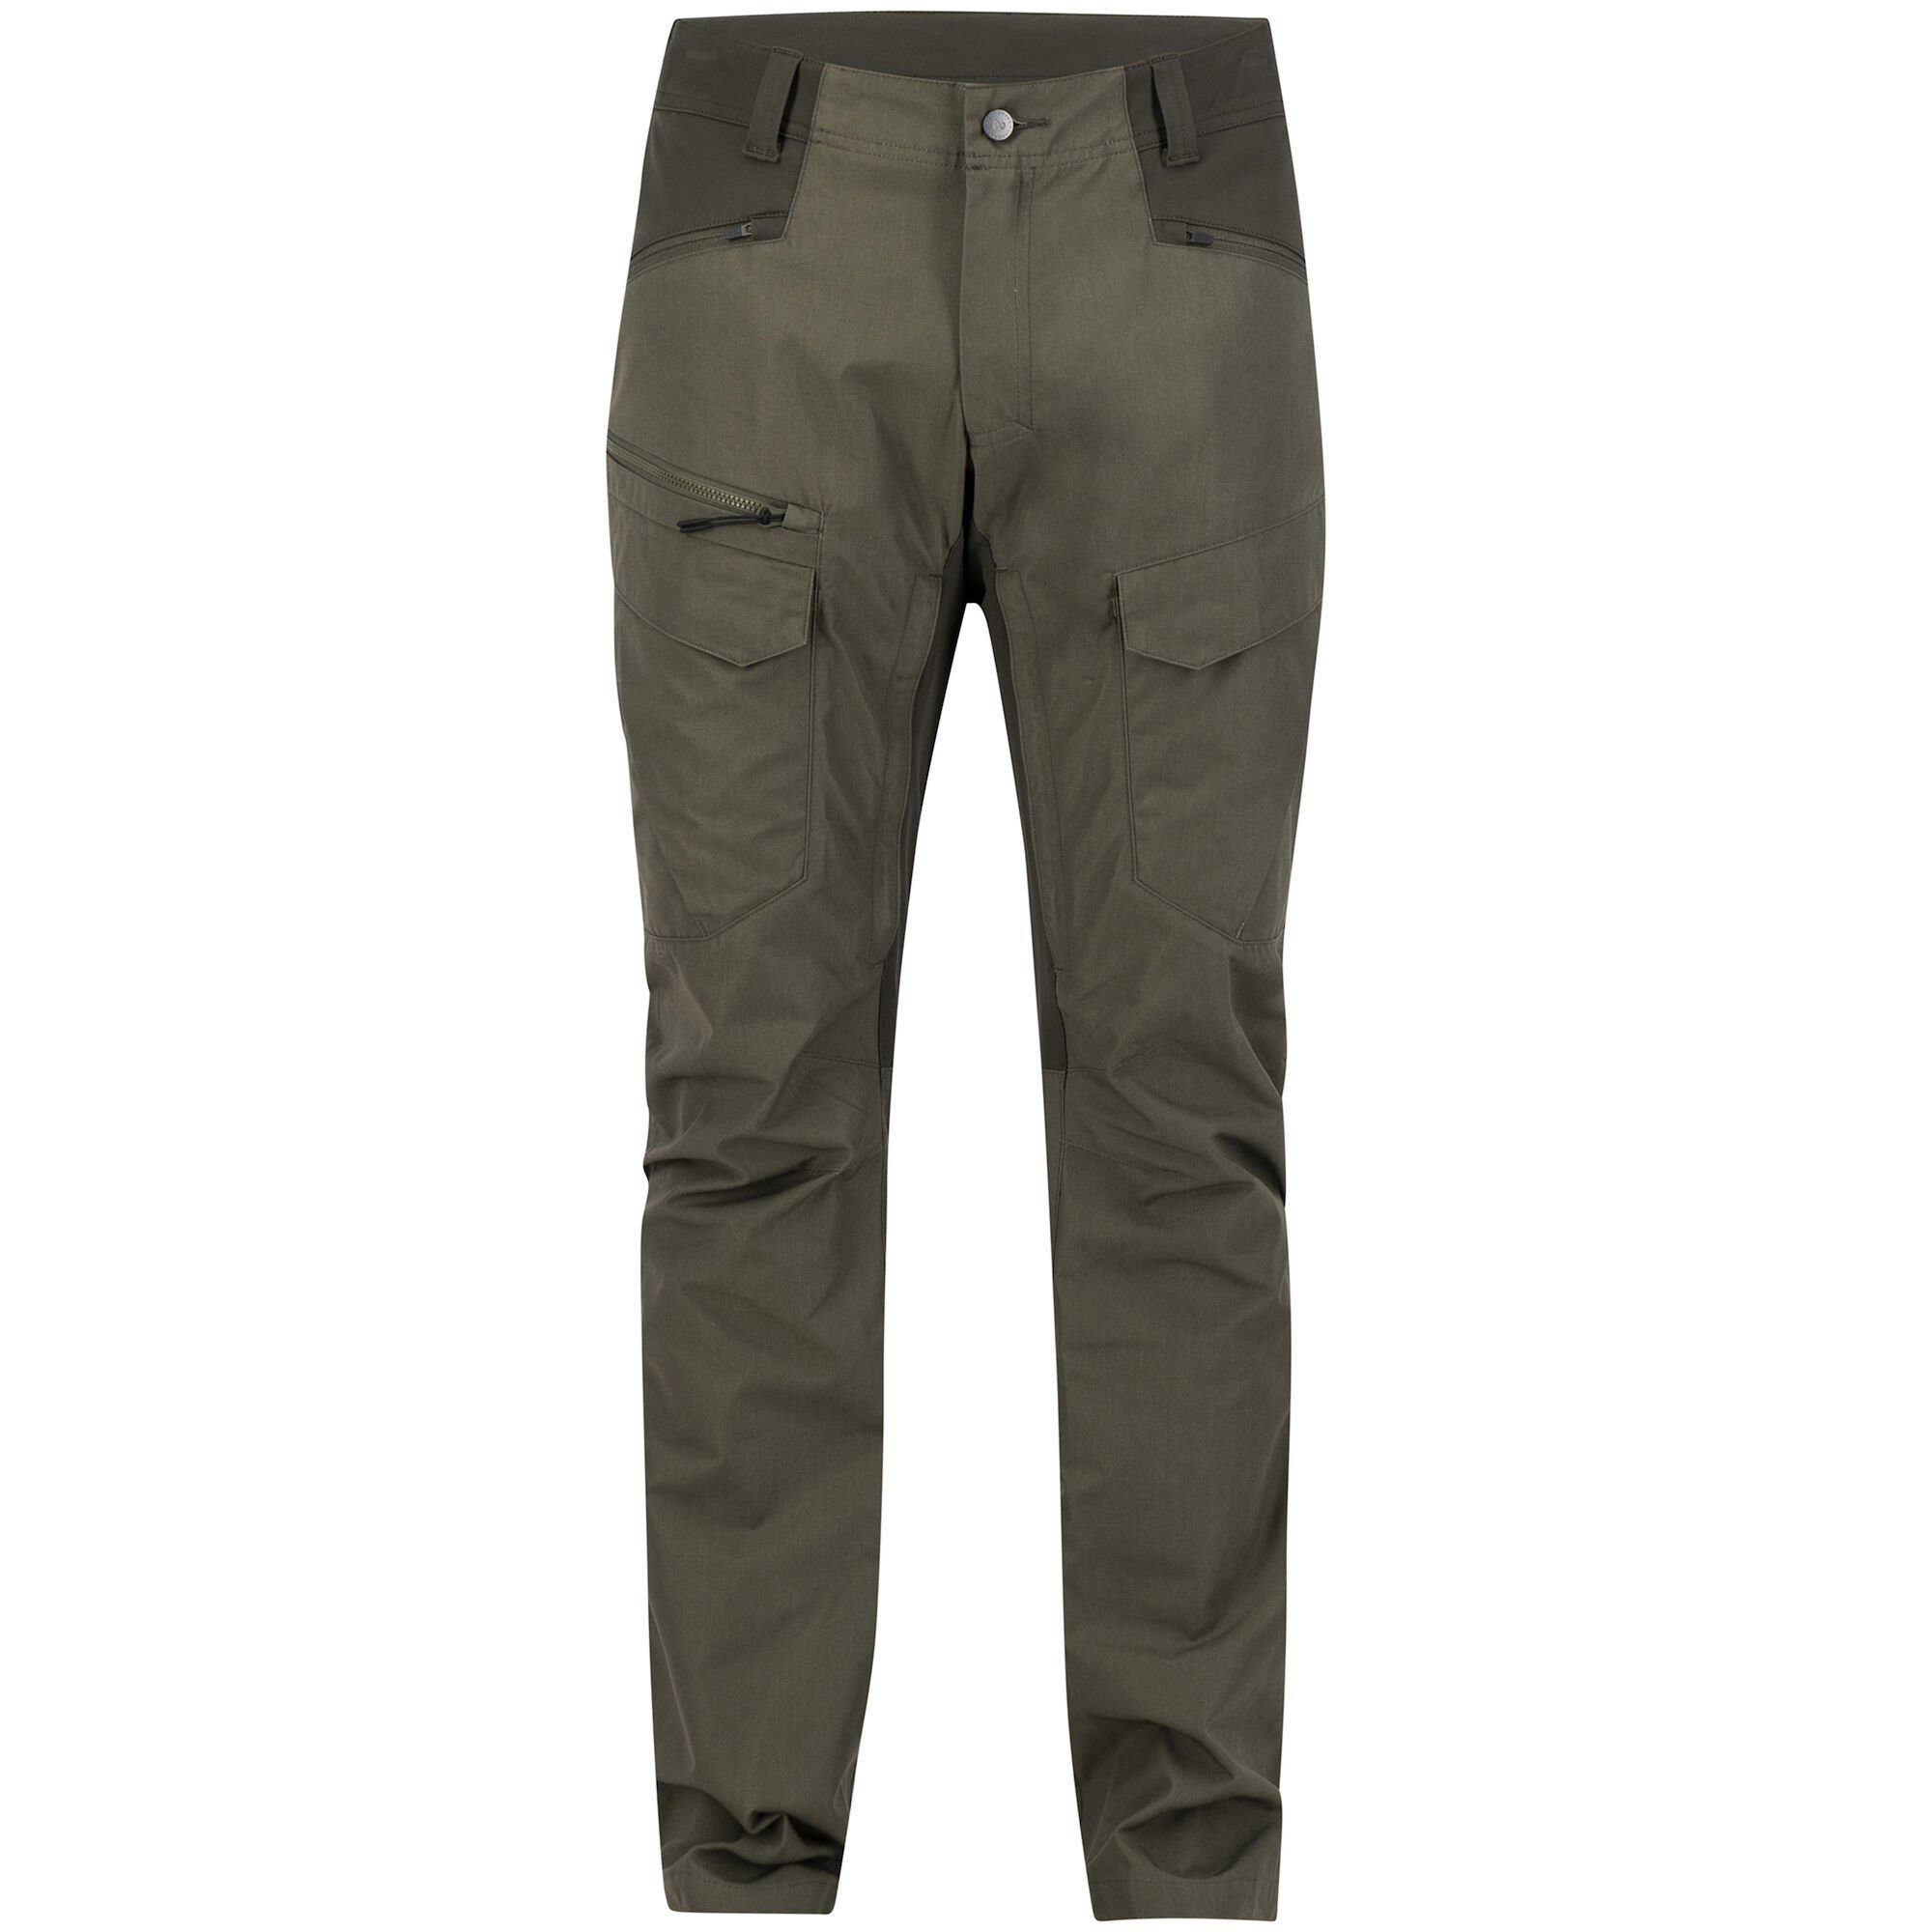 Lundhags Stretch Cargo Hybrid Outdoorhose Herren Green Lundhags Fulu Forest Pant